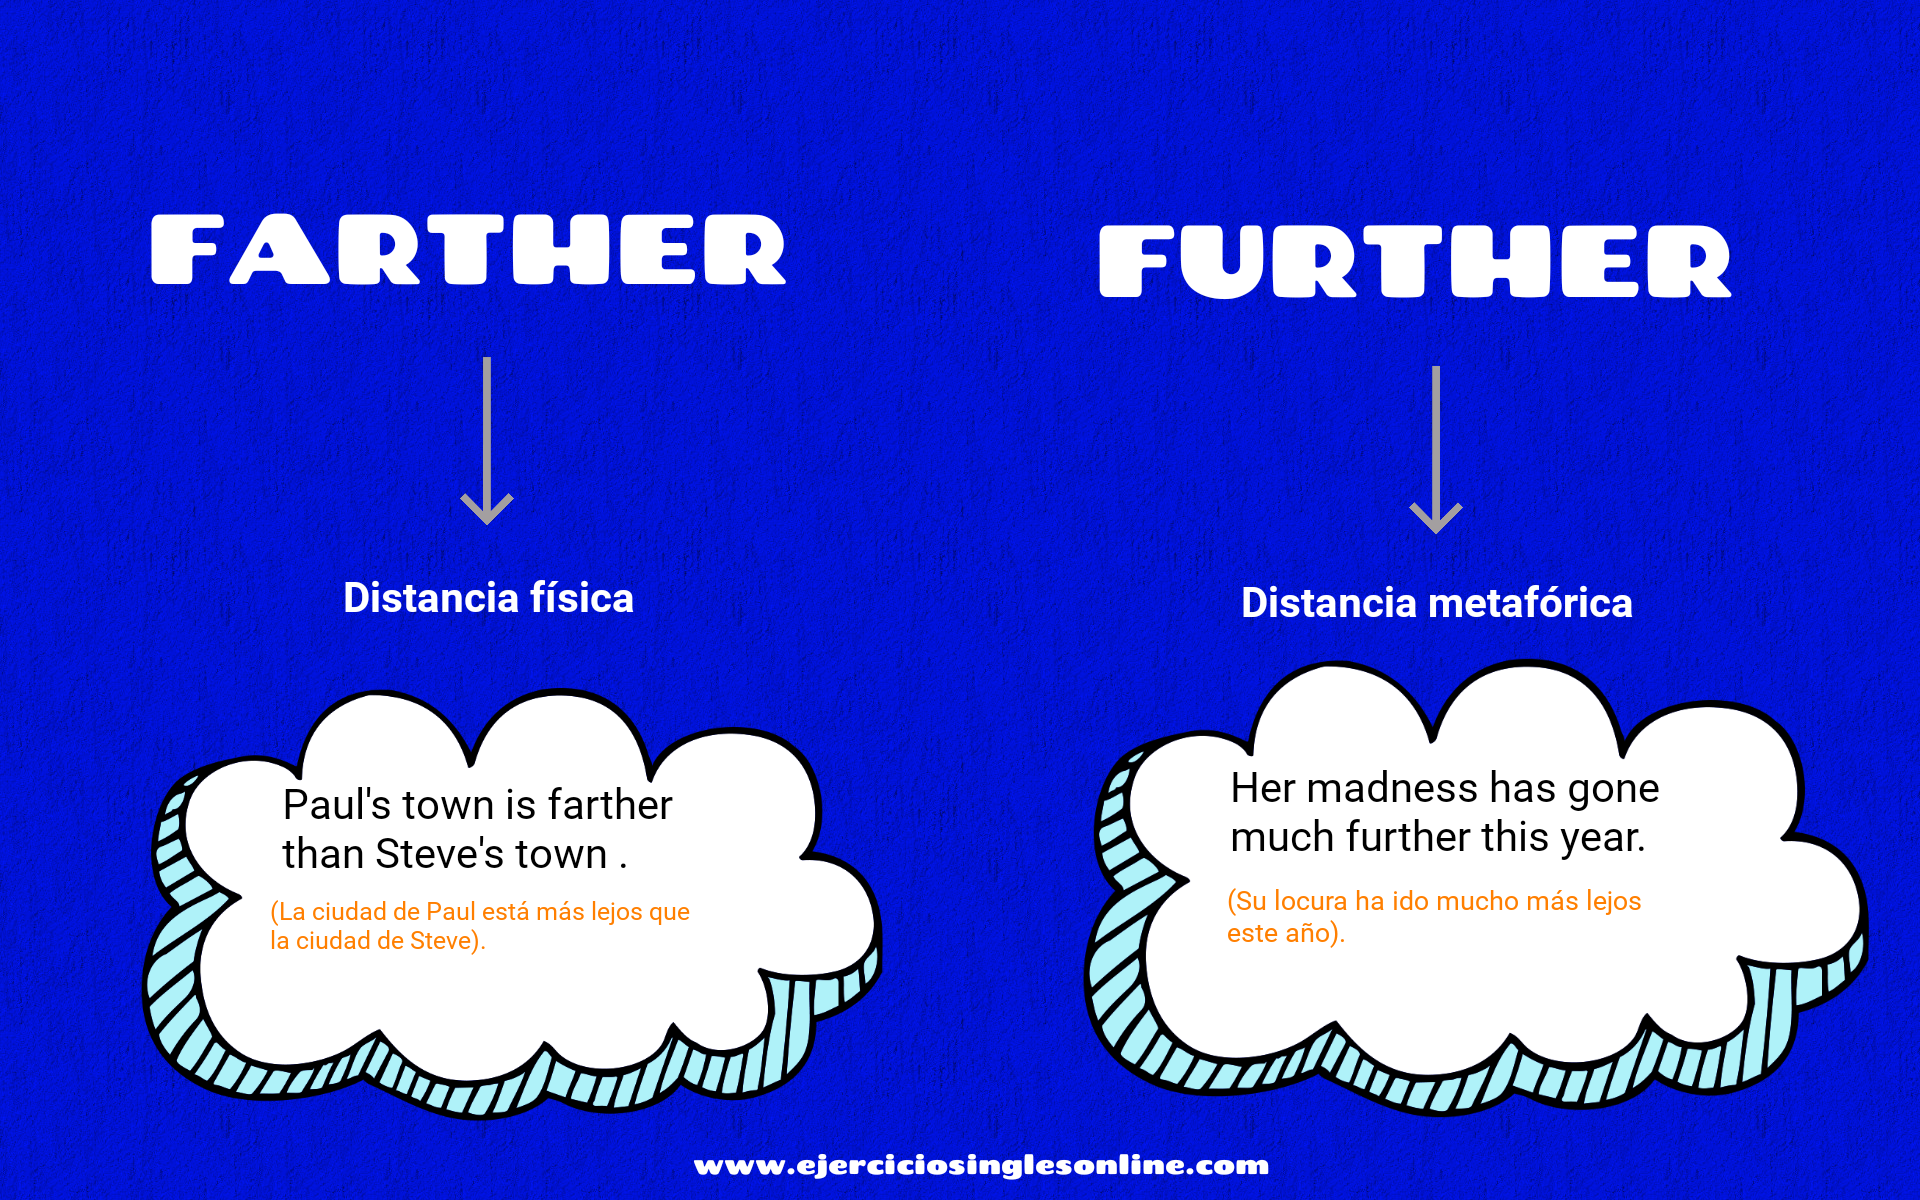 Farther further разница. Far farther further разница. Farthest furthest разница. Further and father разница. Further vs farther